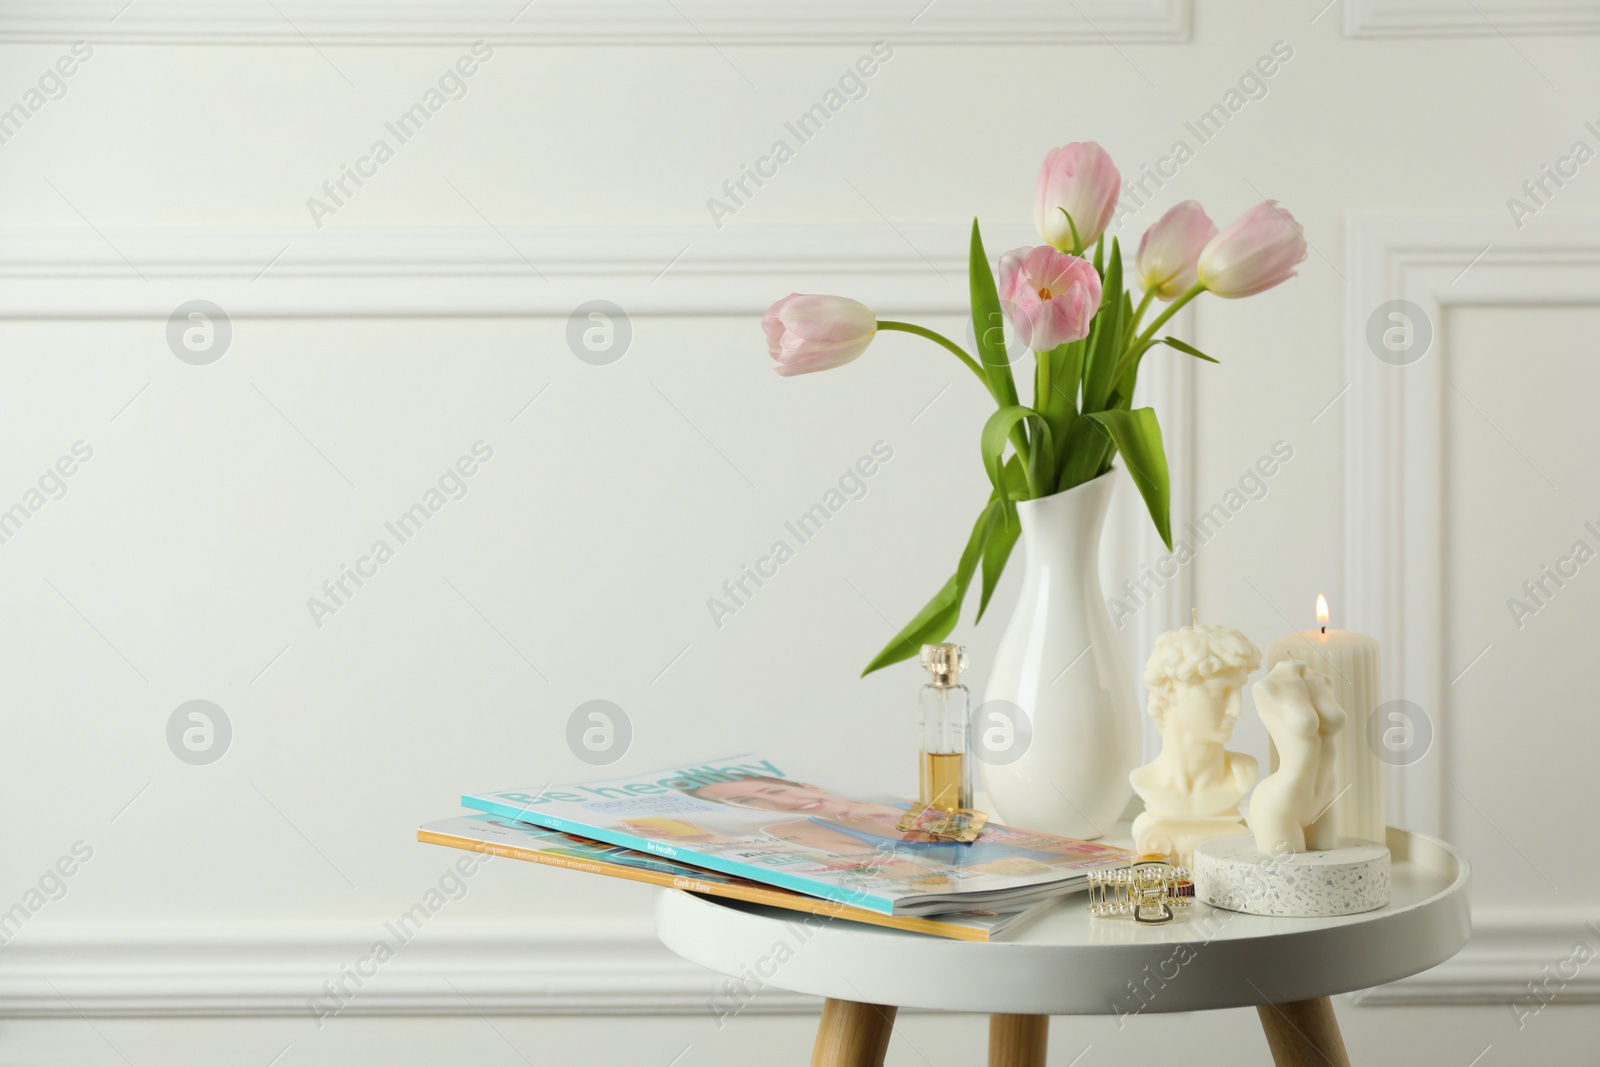 Photo of Different beautiful candles and tulips on white table, space for text. Stylish decor